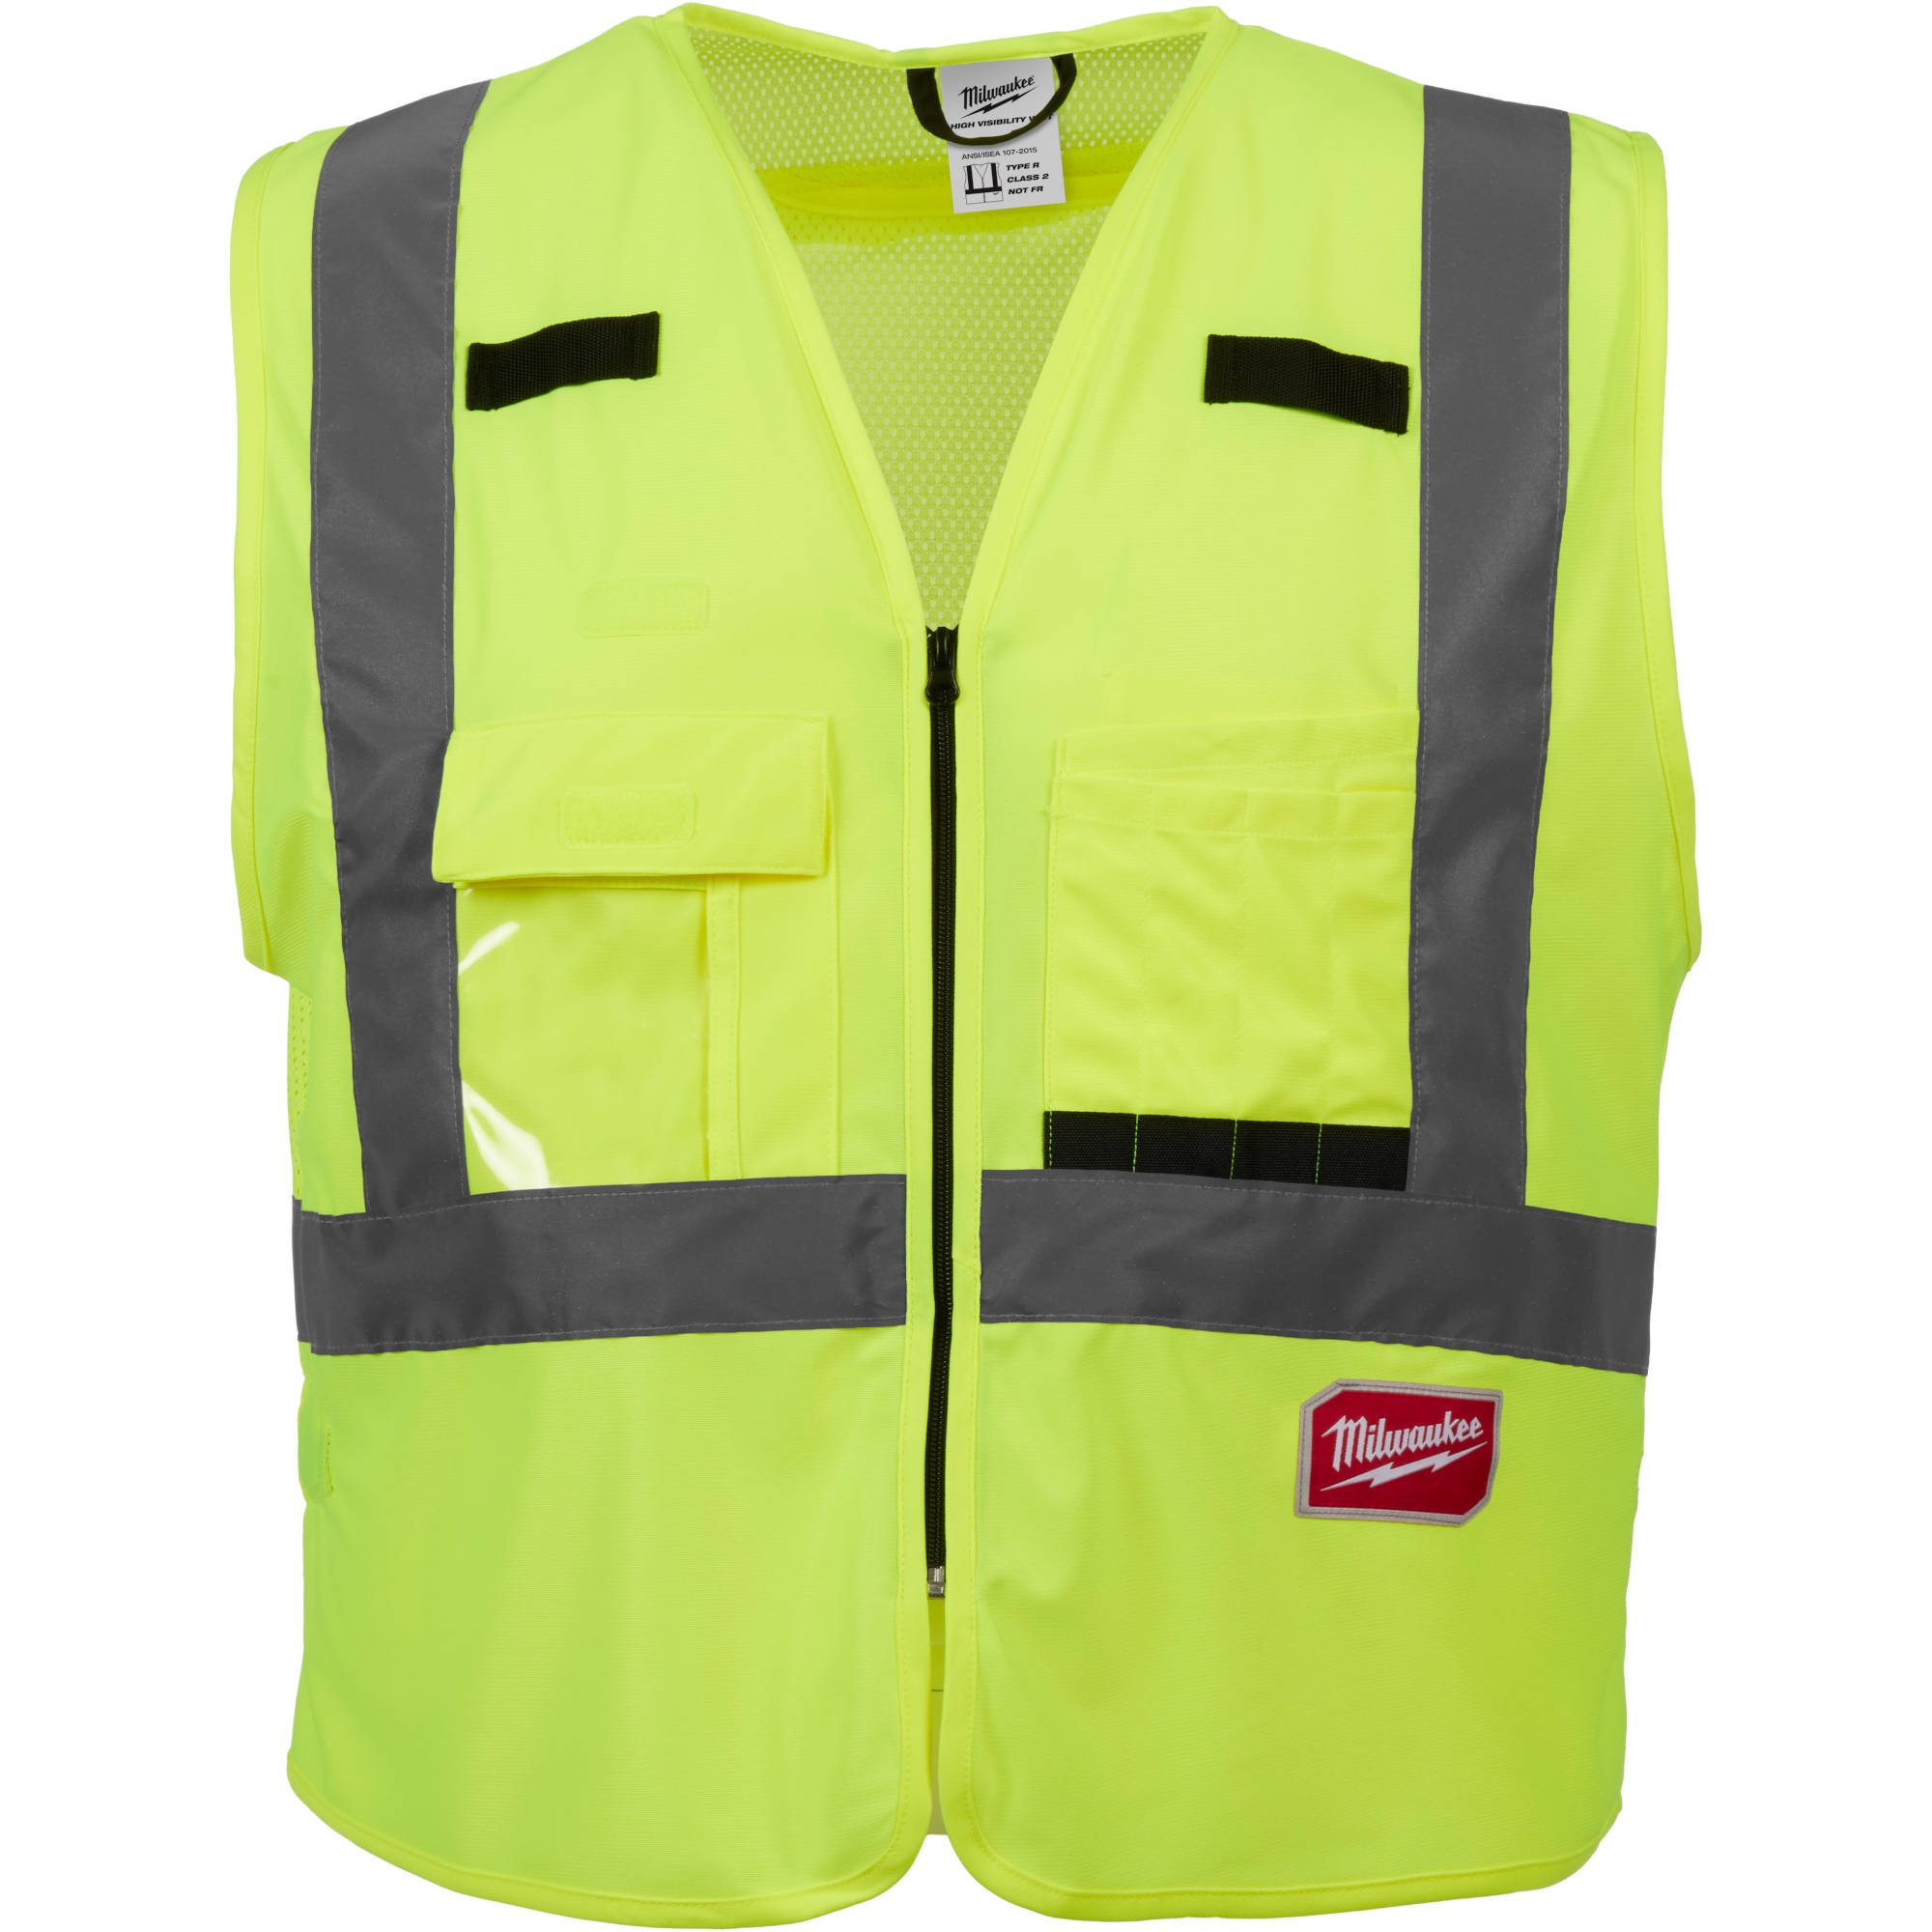 48-73-5022 Milwaukee Class 2 High Visibility Safety Vests - L-XL 2